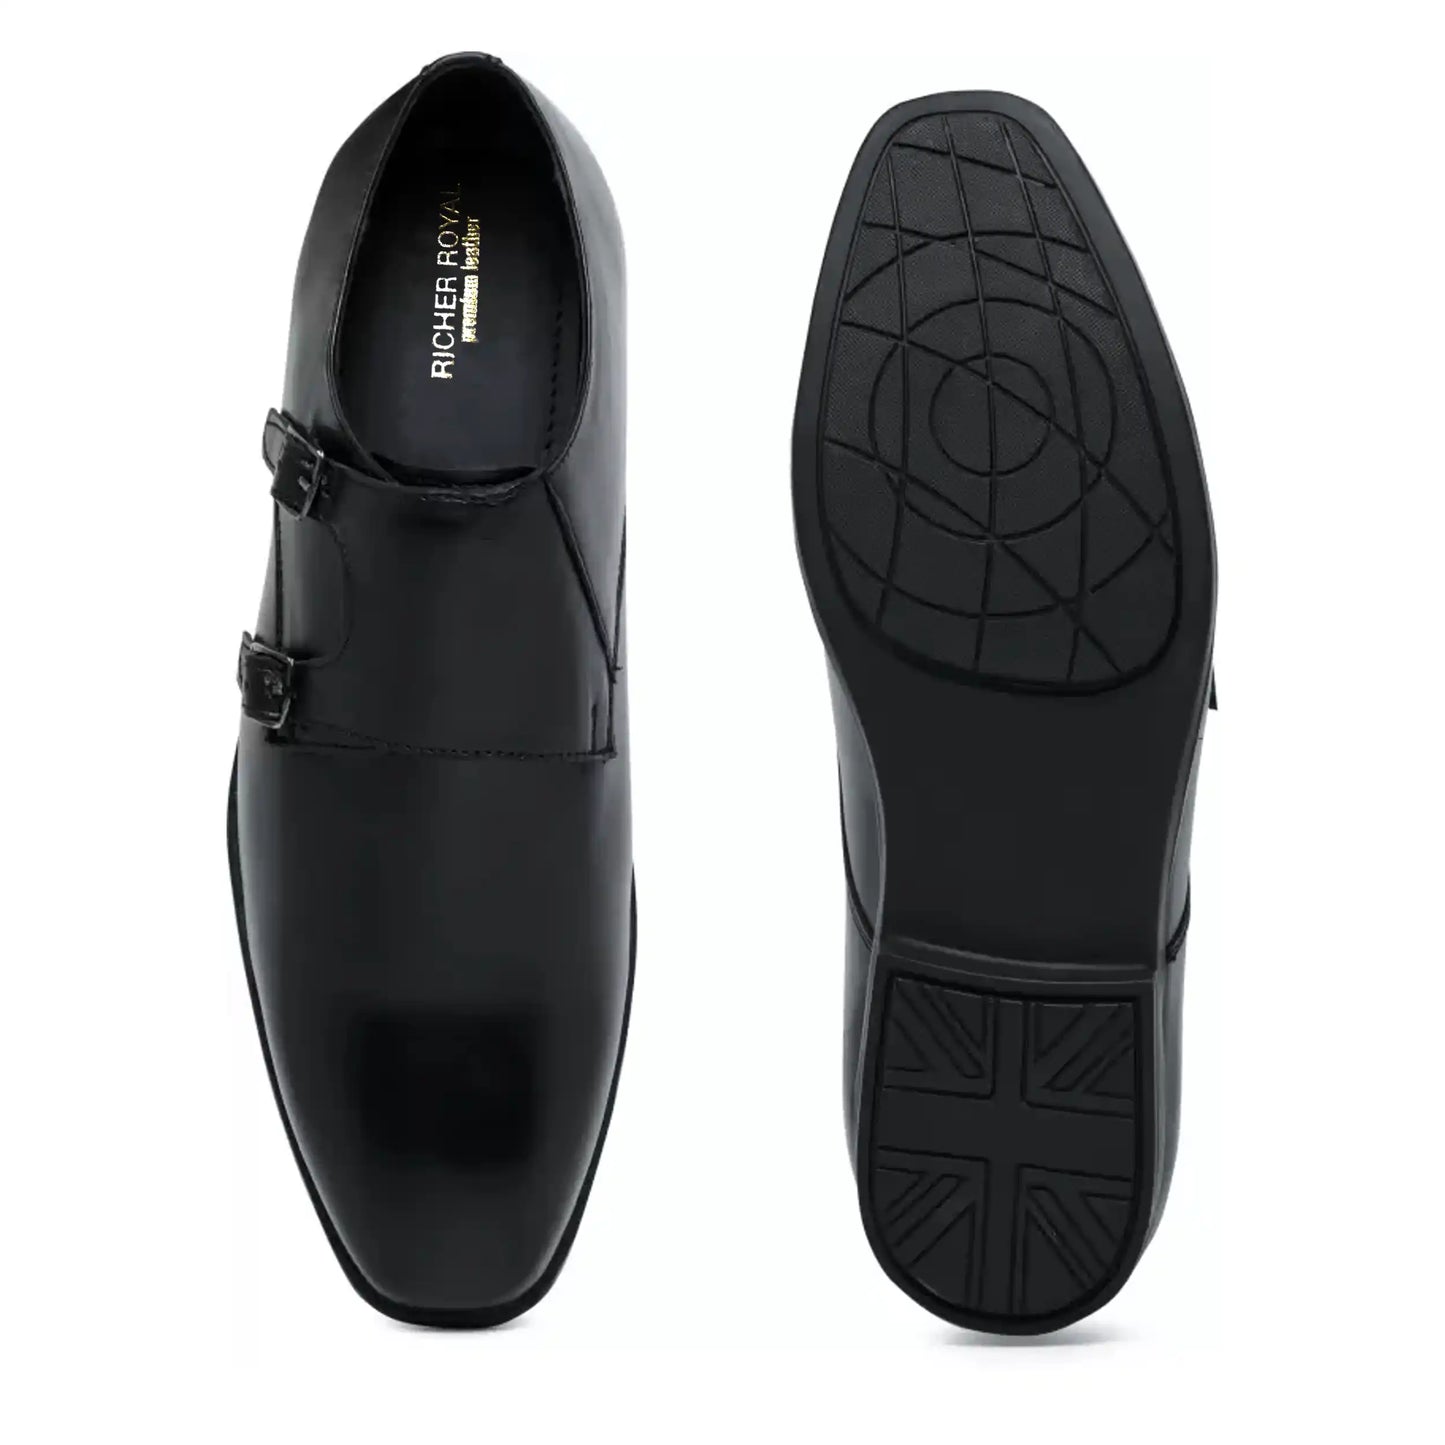 Double Monk Strap Pure Leather Shoes for Men